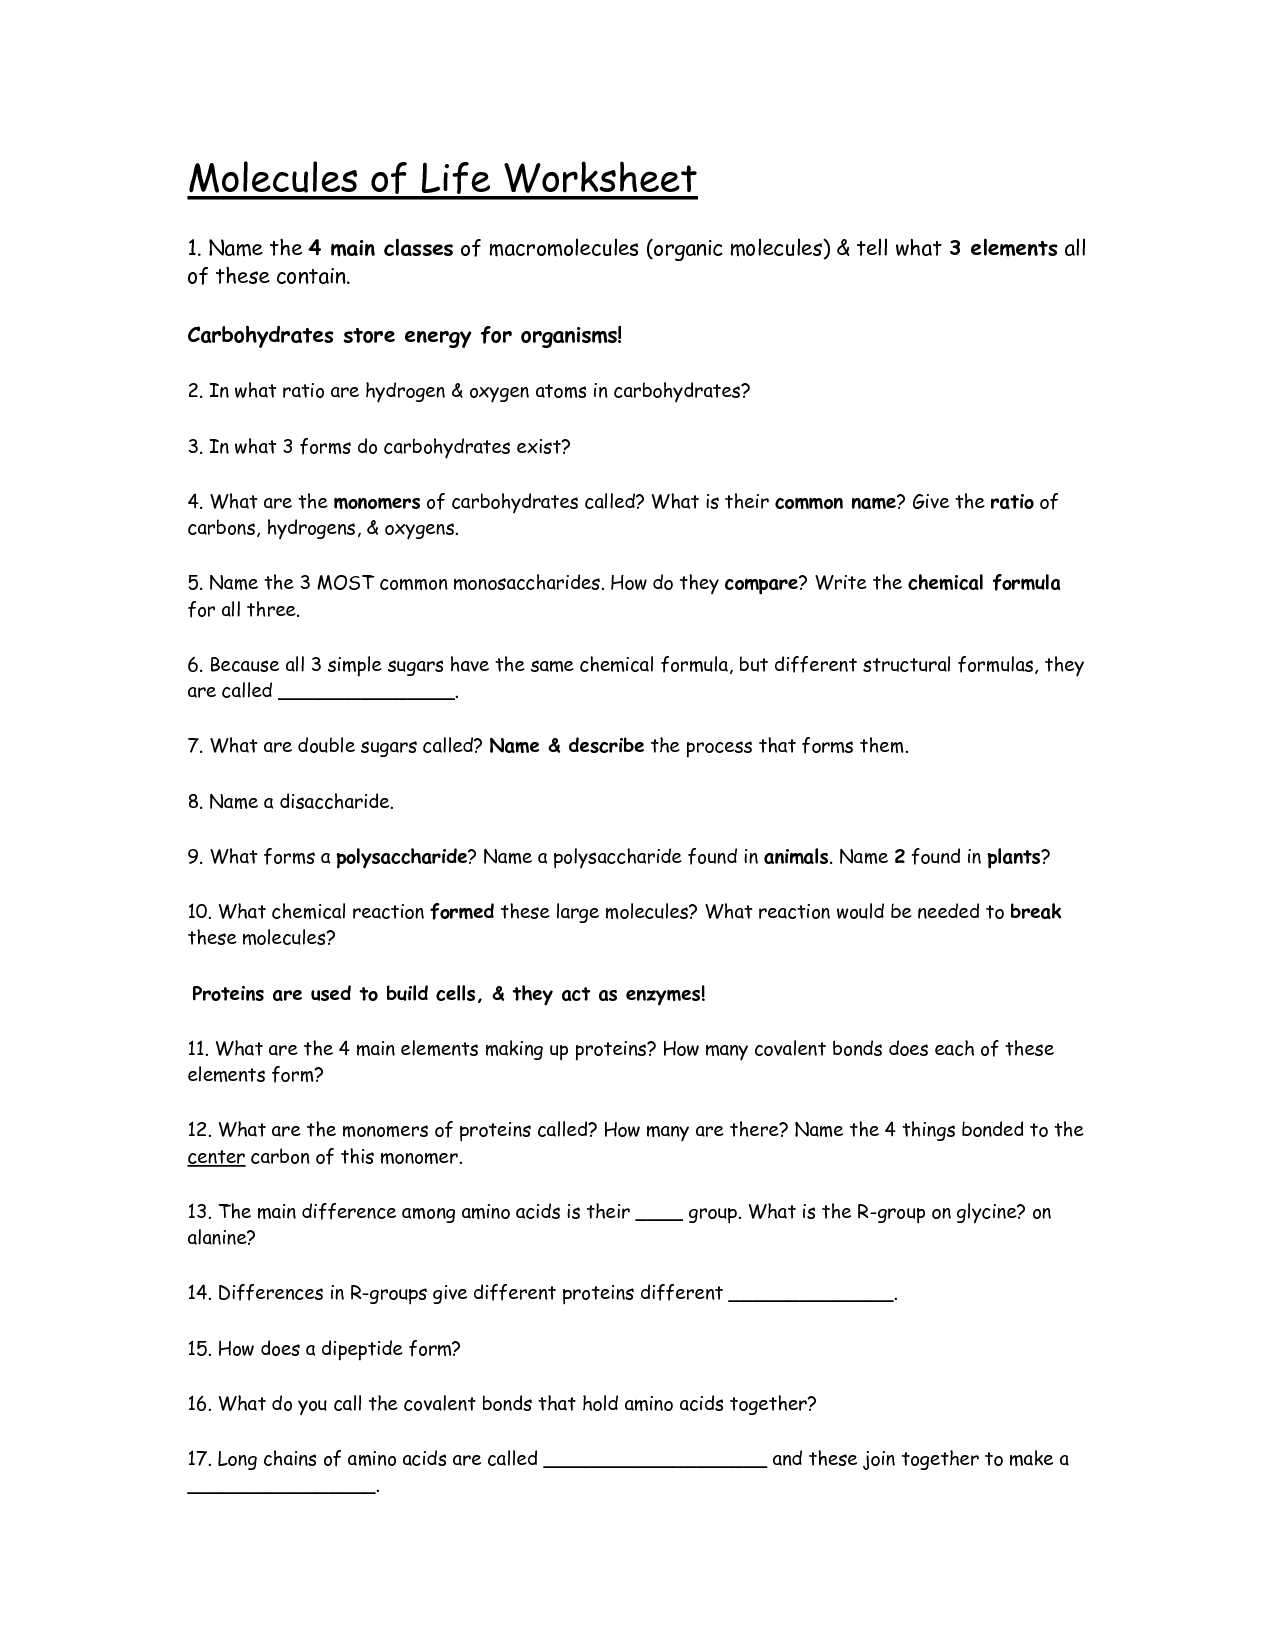 The Book Of Life Worksheet Answers